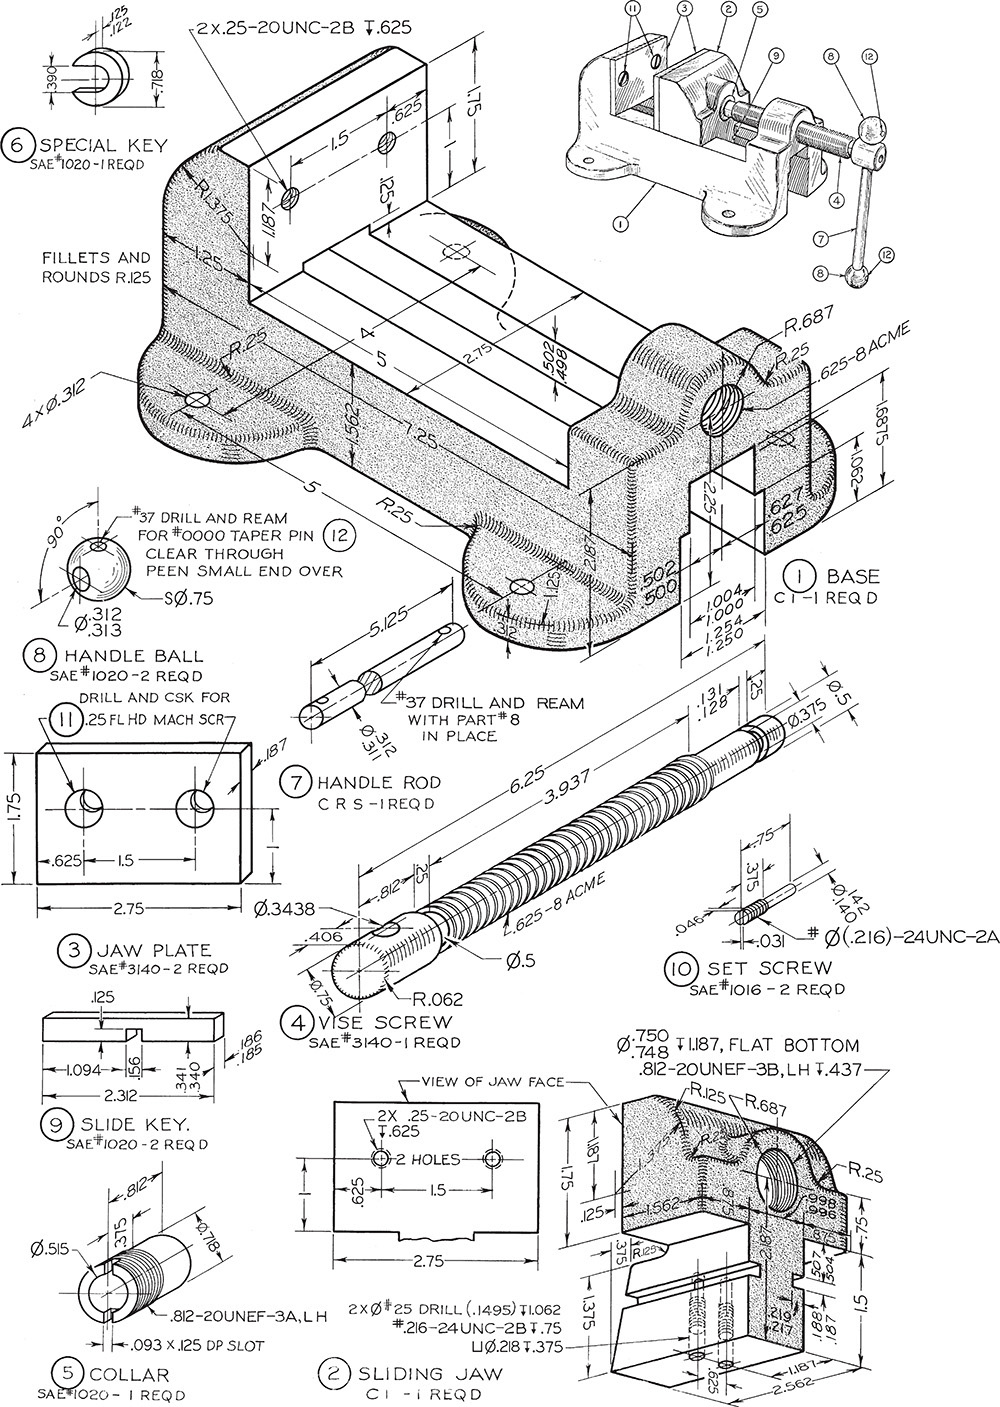 Figure depicts the detailed drawing of the machine vise on the facing page and the assembly details are assigned in the drawing.